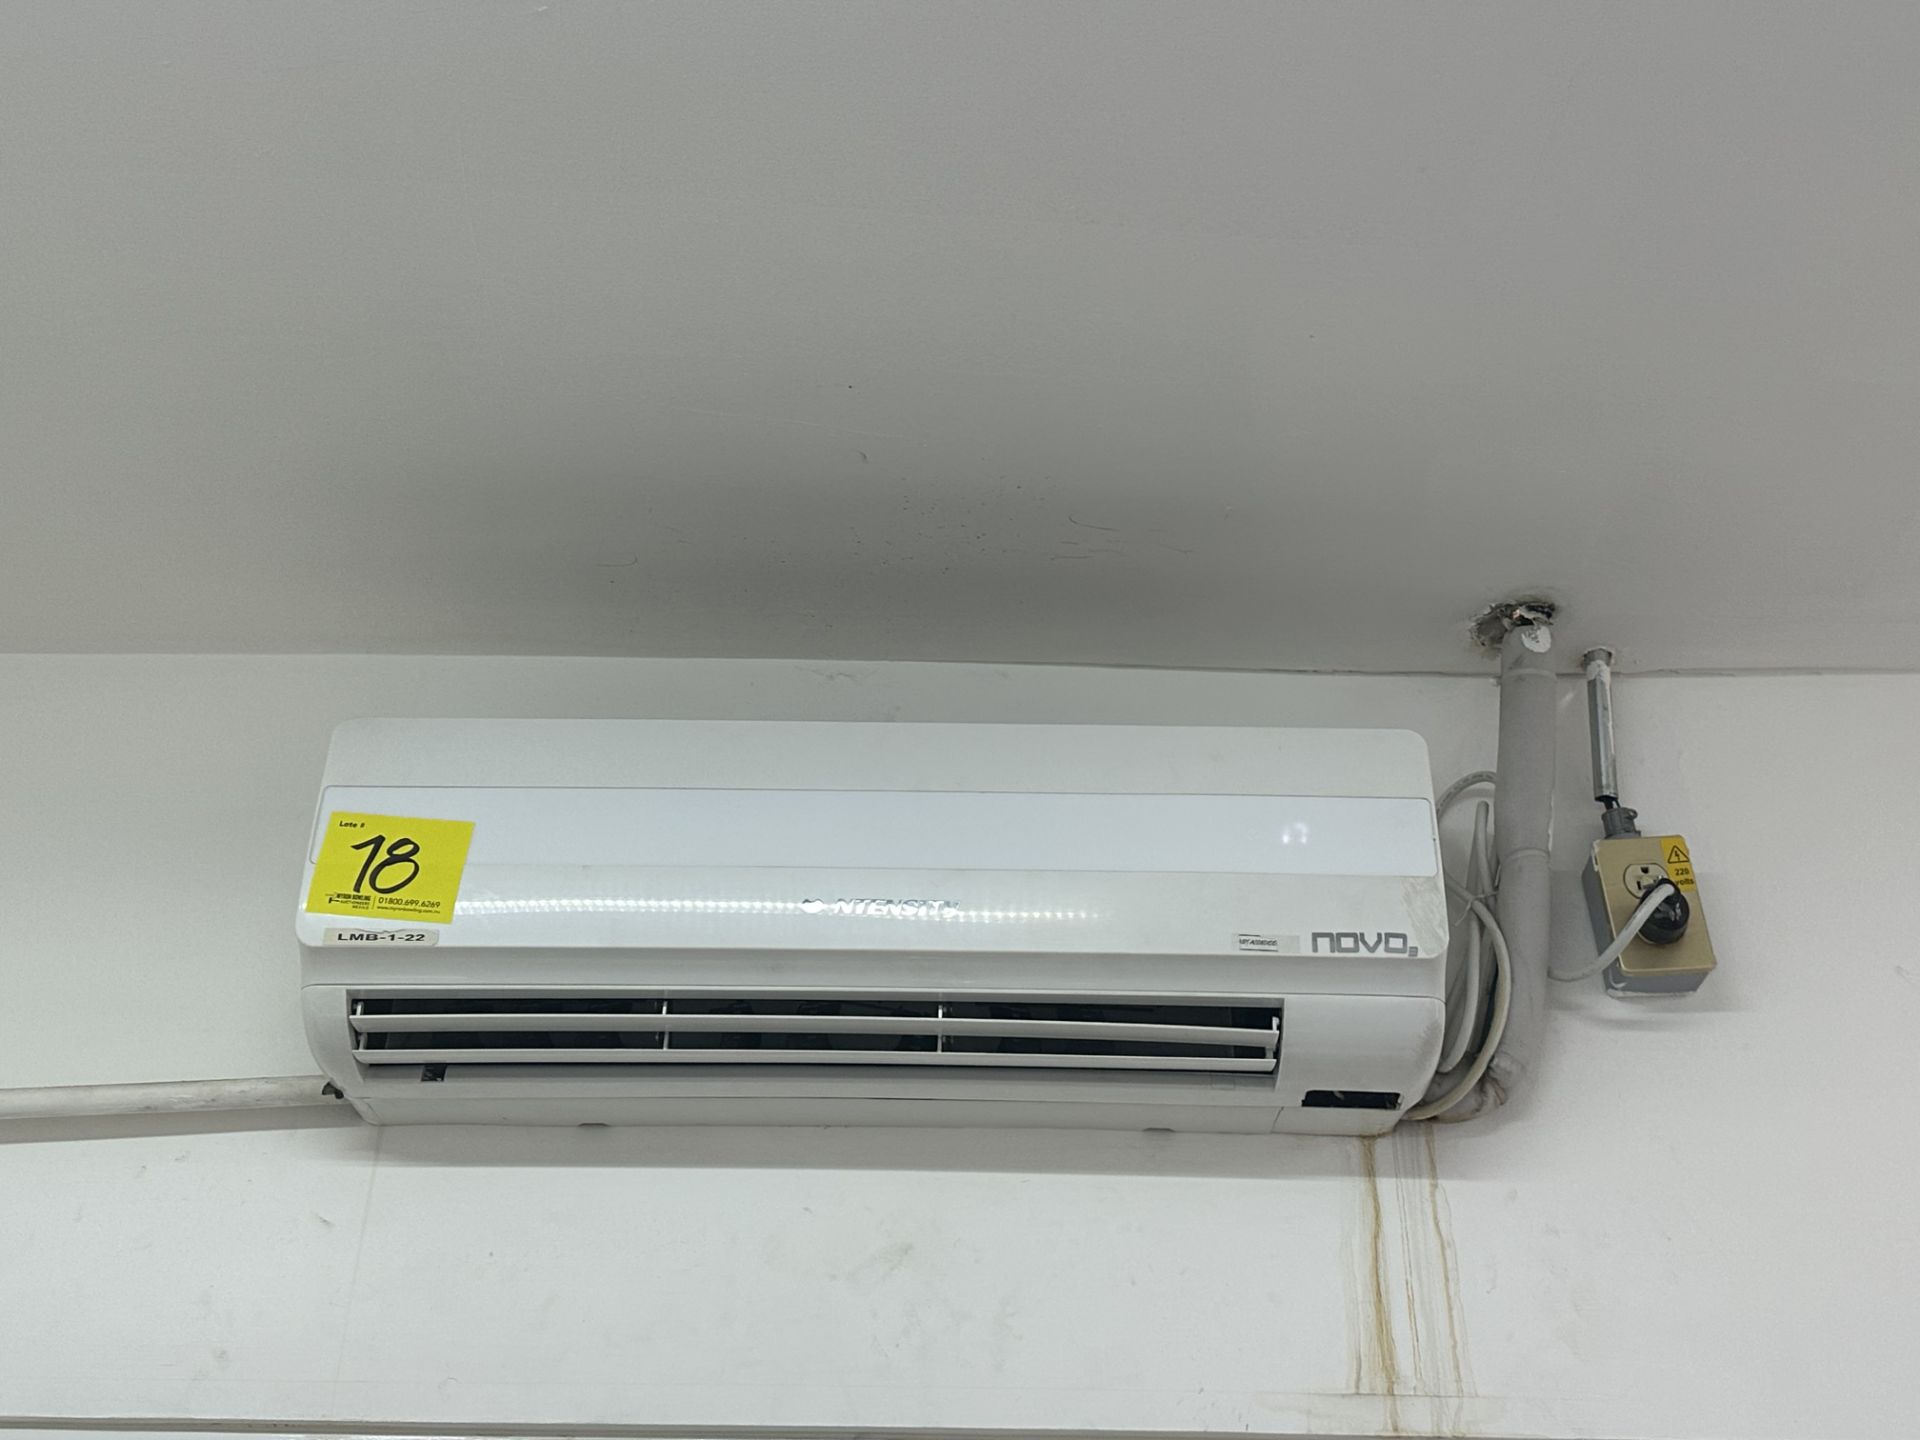 Lot of 3 minisplit air conditioners: 1 Carrier Air Conditioner, Model ND, ND Series, includes conde - Image 10 of 15